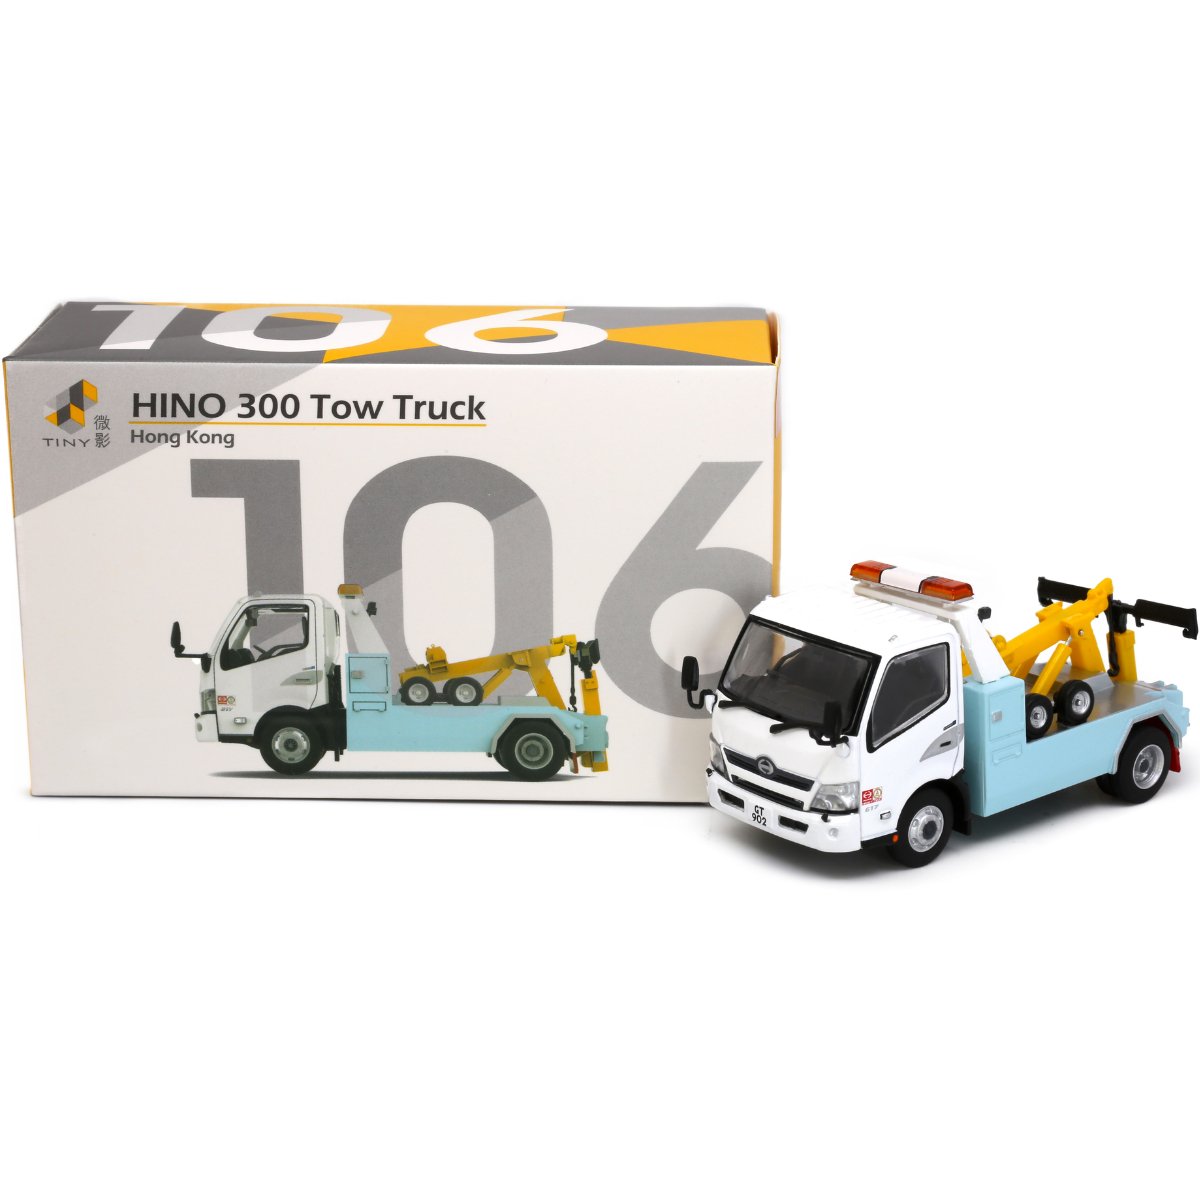 Tiny Models Hino 300 Tow Truck (1:64 Scale)